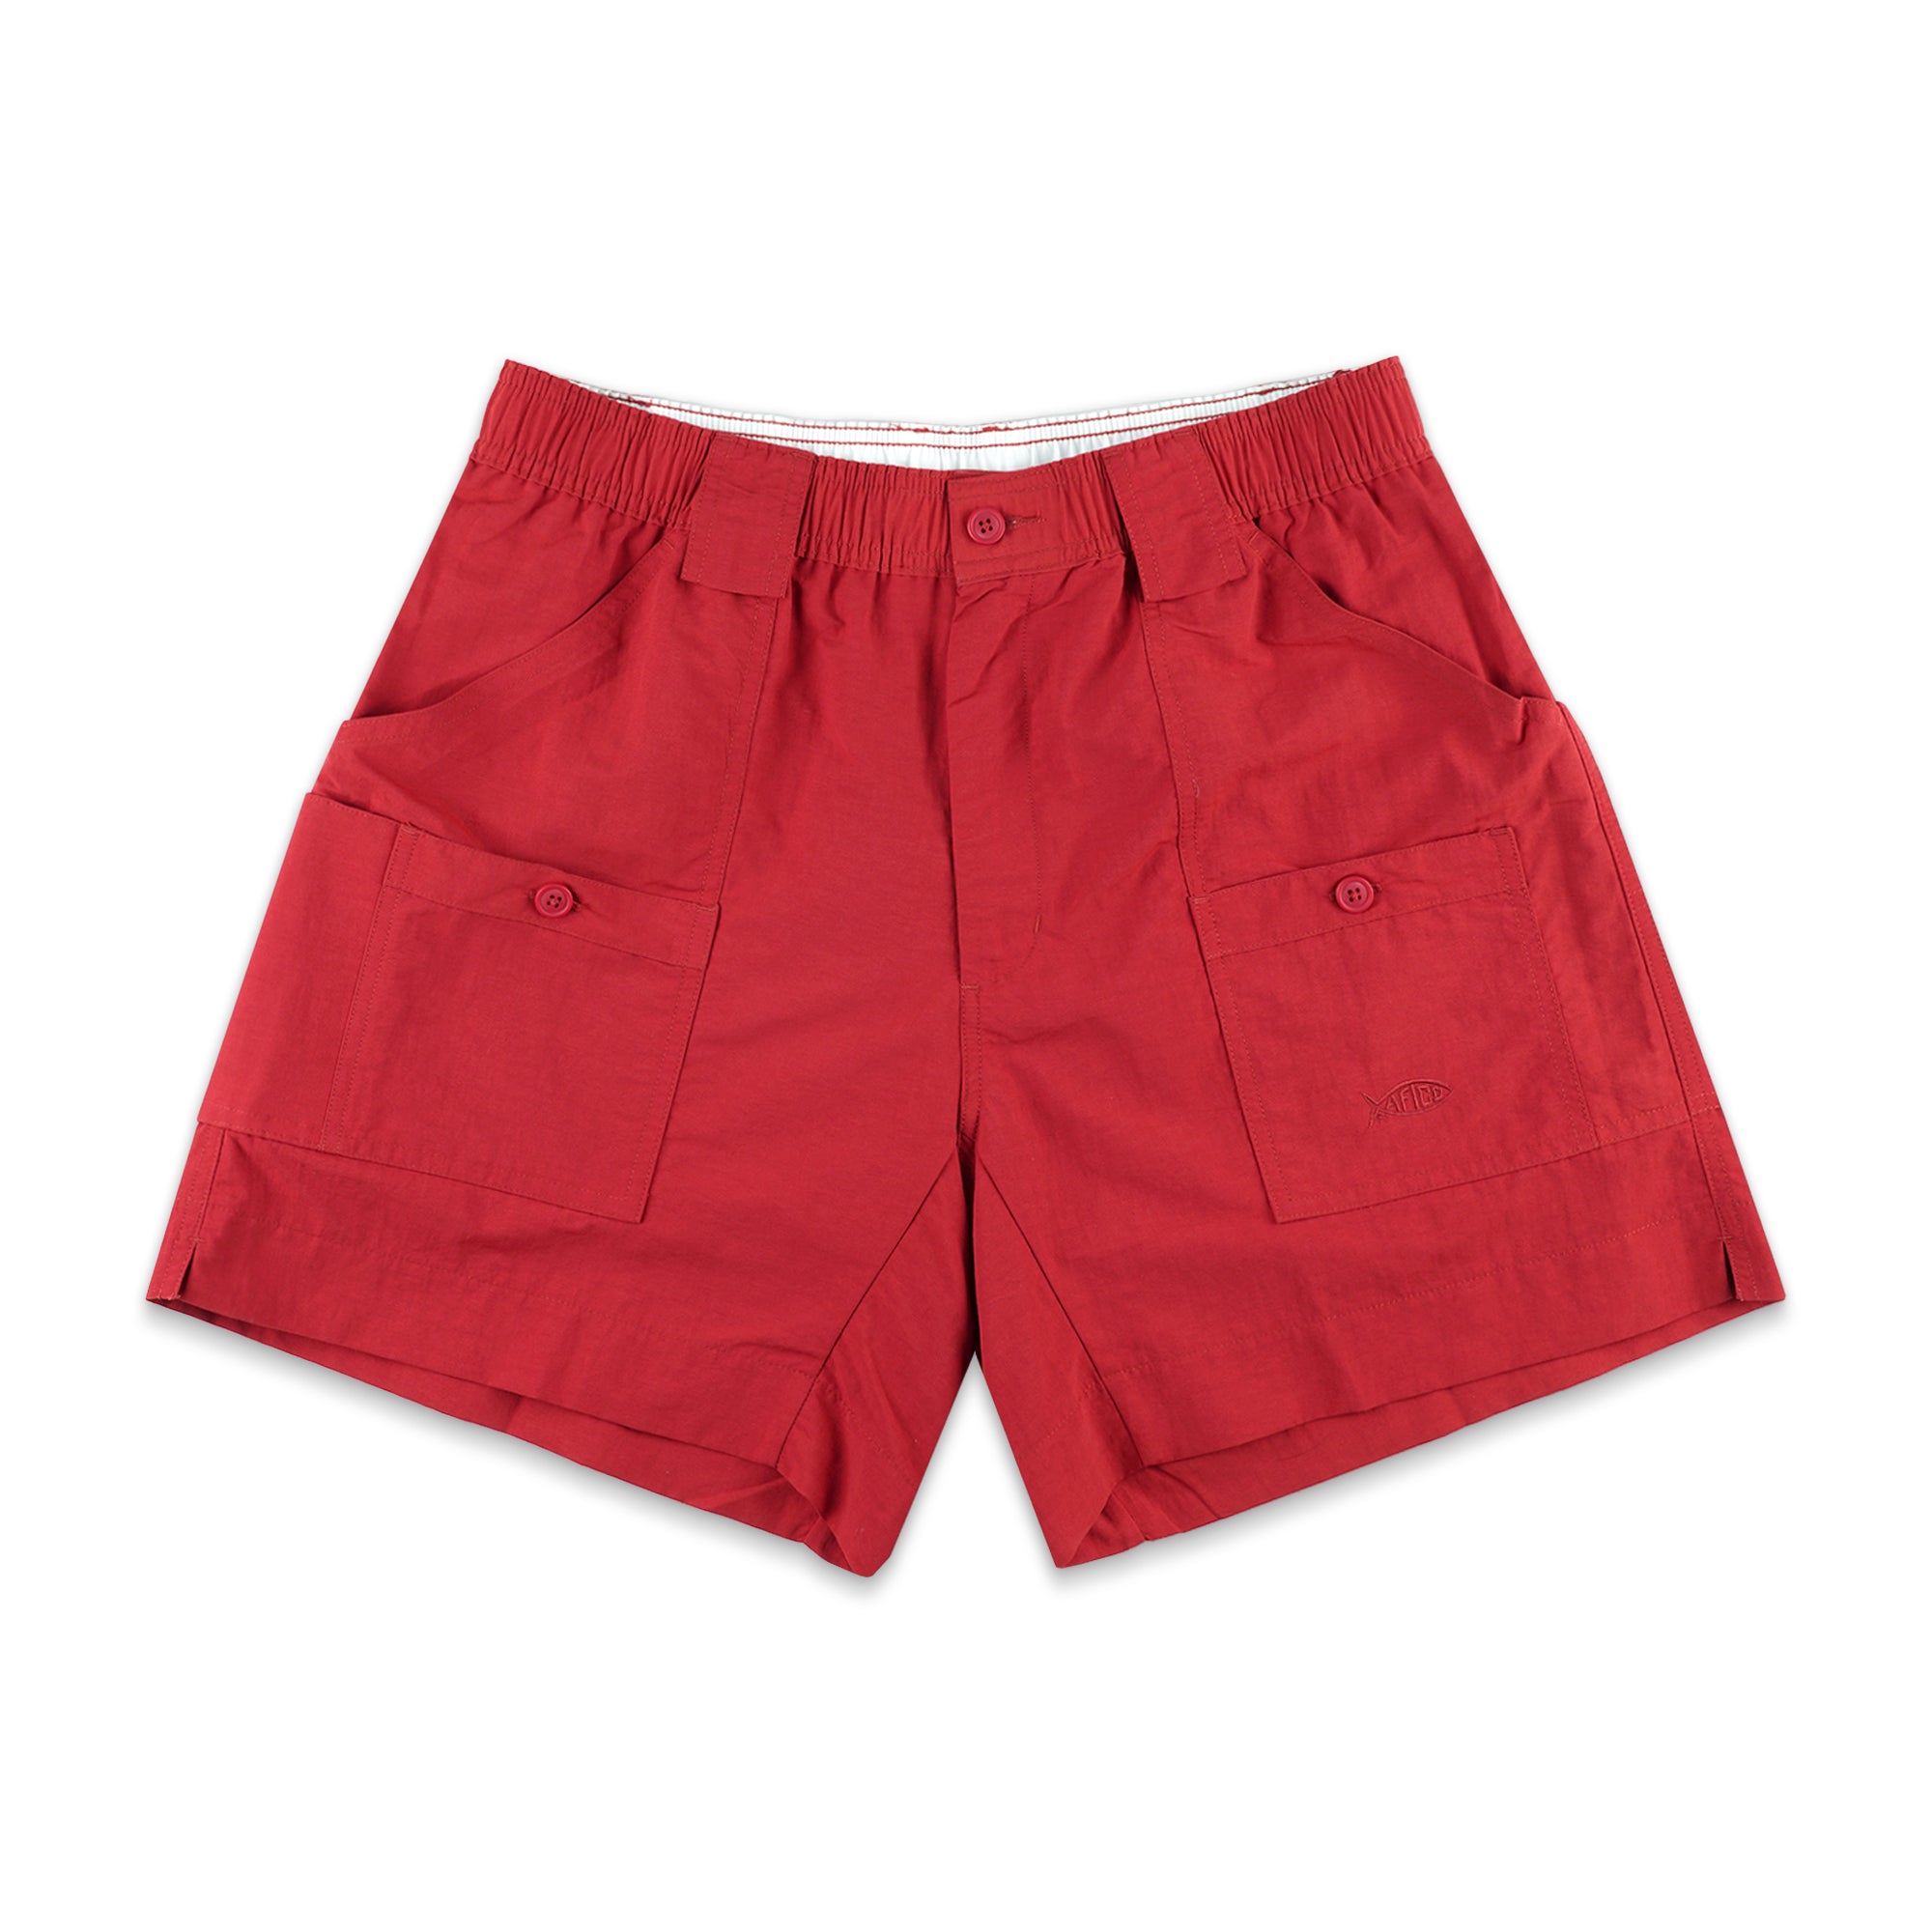 Original Fishing Shorts by AFTCO